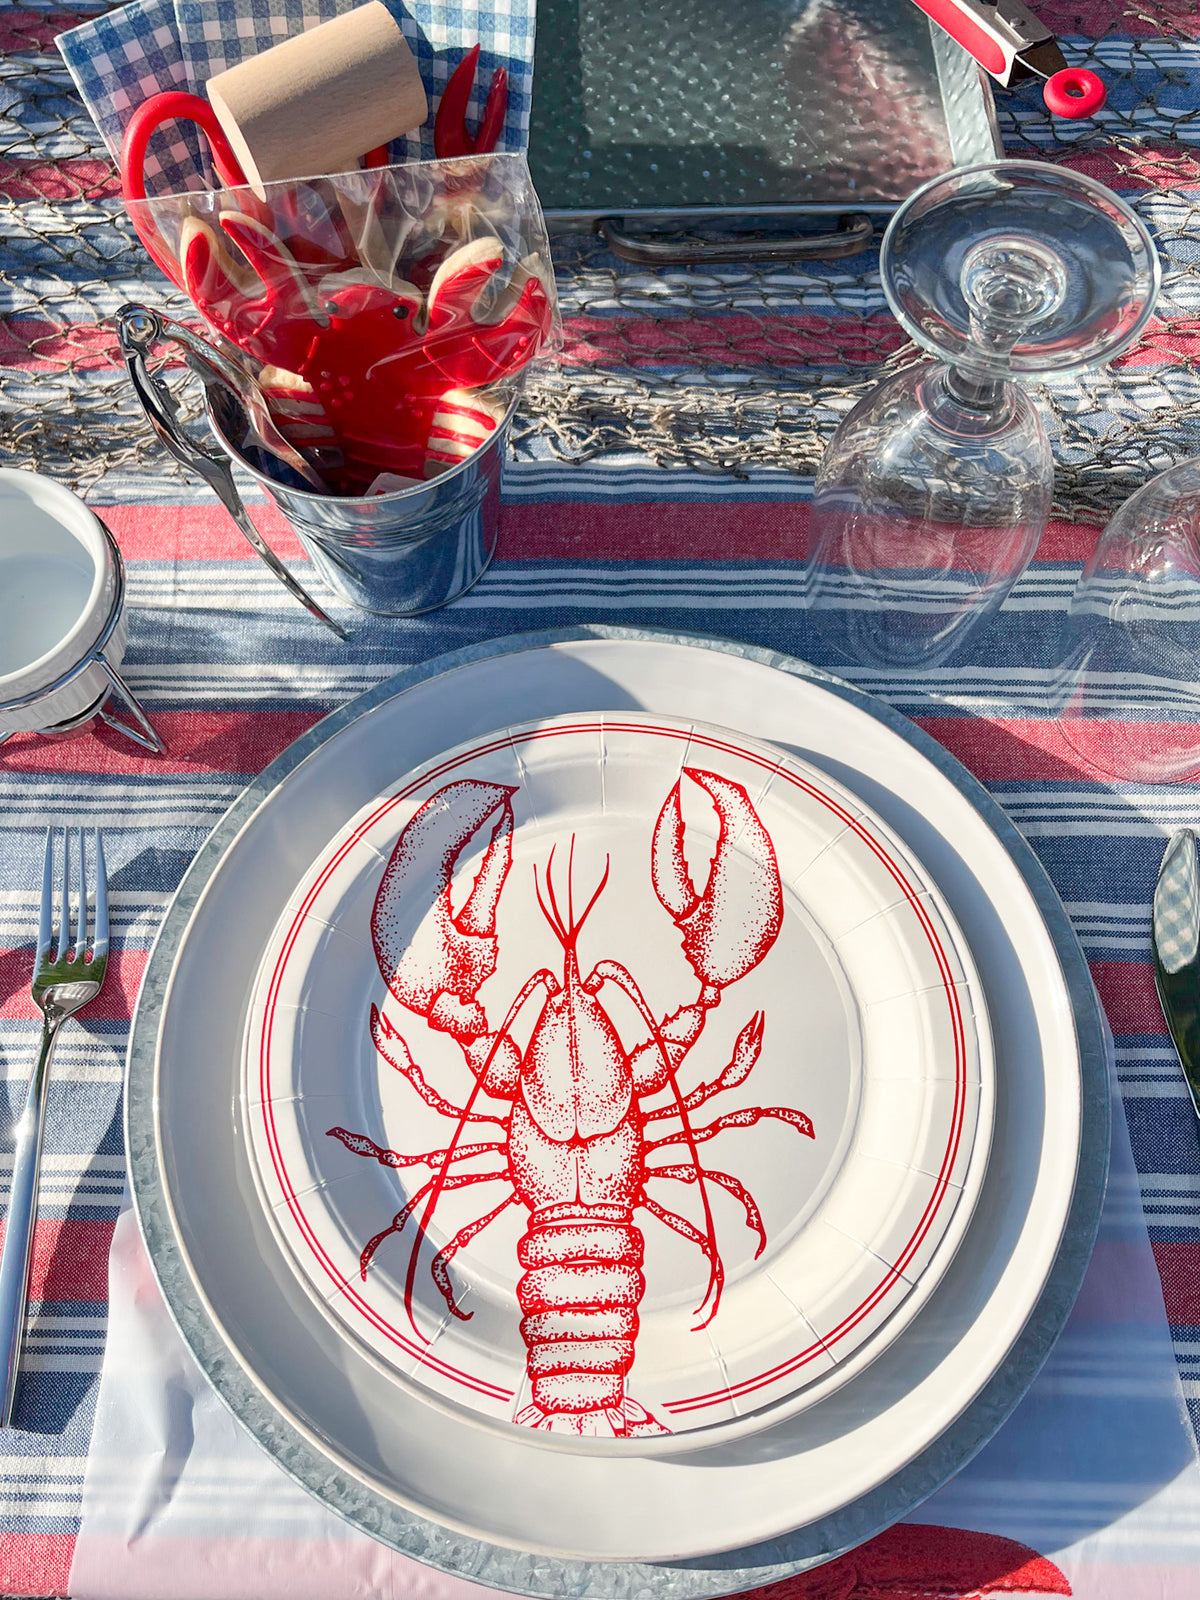 Beistle Red & White Crawfish Tablecover, 54” x 108” – Plastic Table Cloth,  Crawfish Boil Accessories, Crawfish Party Decorations, Crawfish Boil  Decorations, Seafood Boil Party Supplies